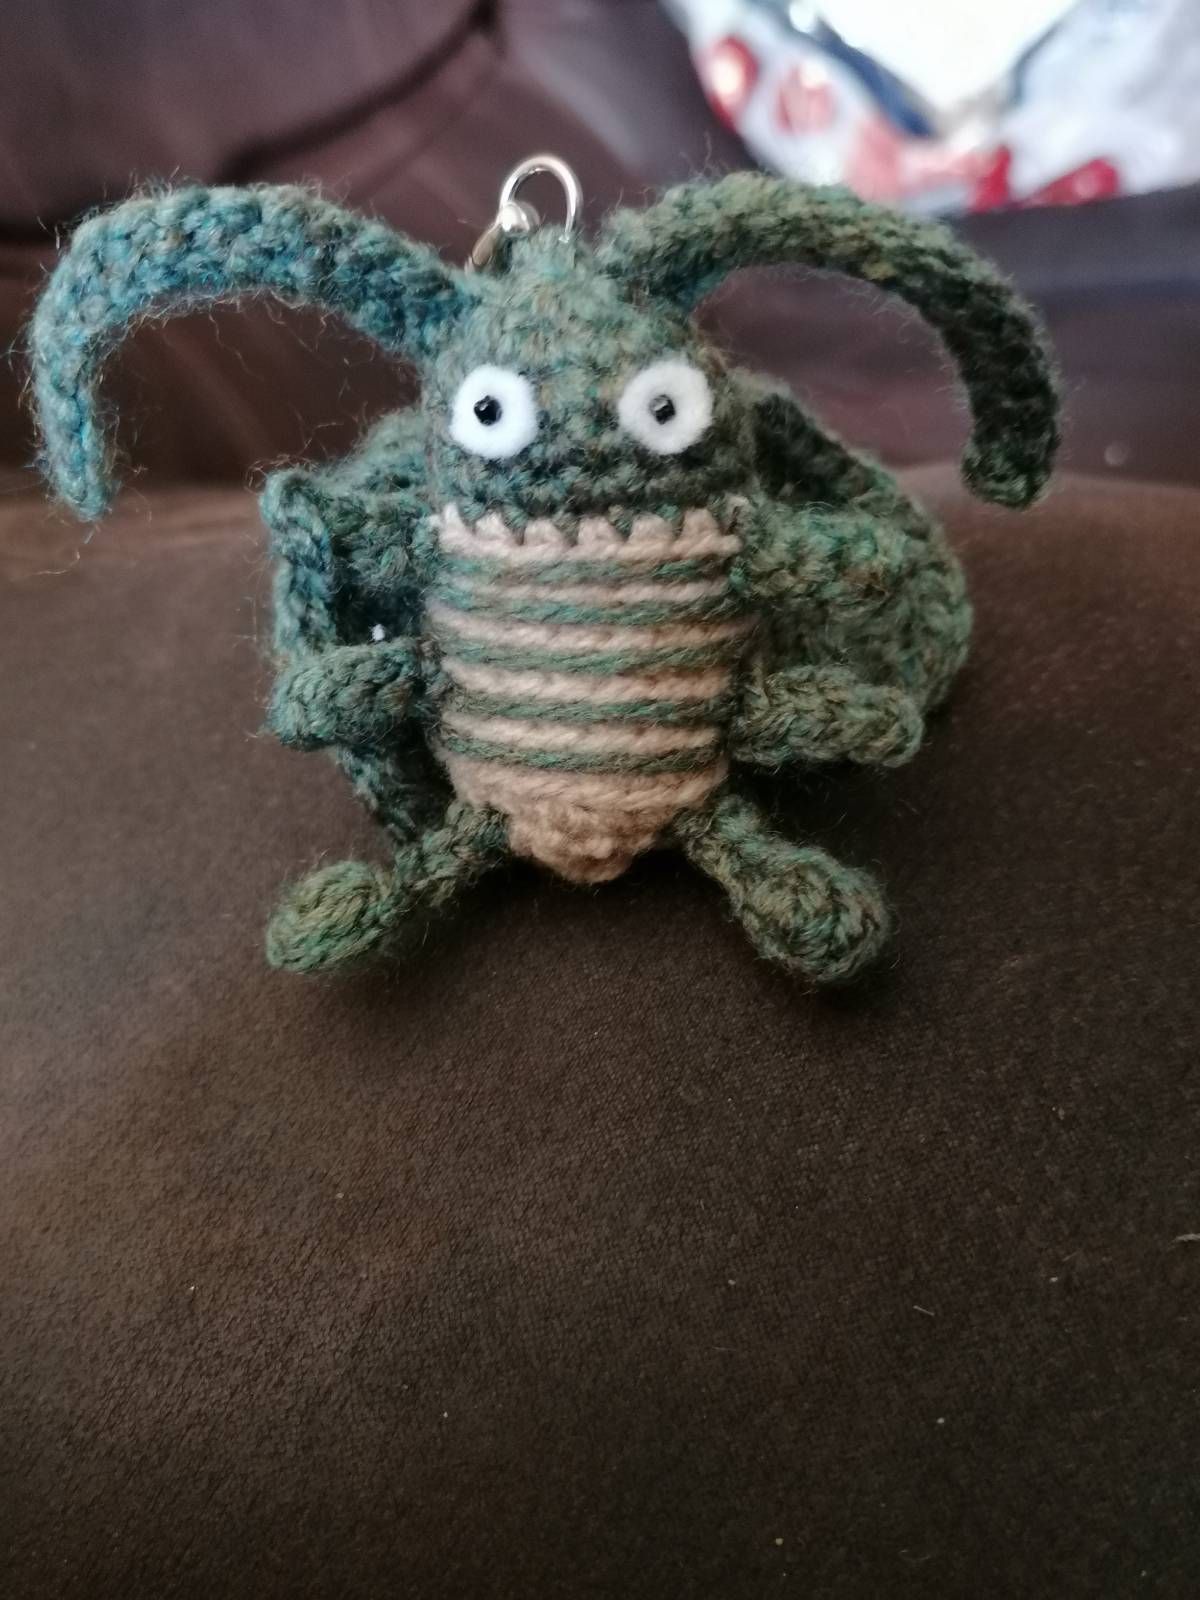 Cockroach Crochet Amigurumi Pattern Review by Samantha Hoggard for Cottontail and Whiskers